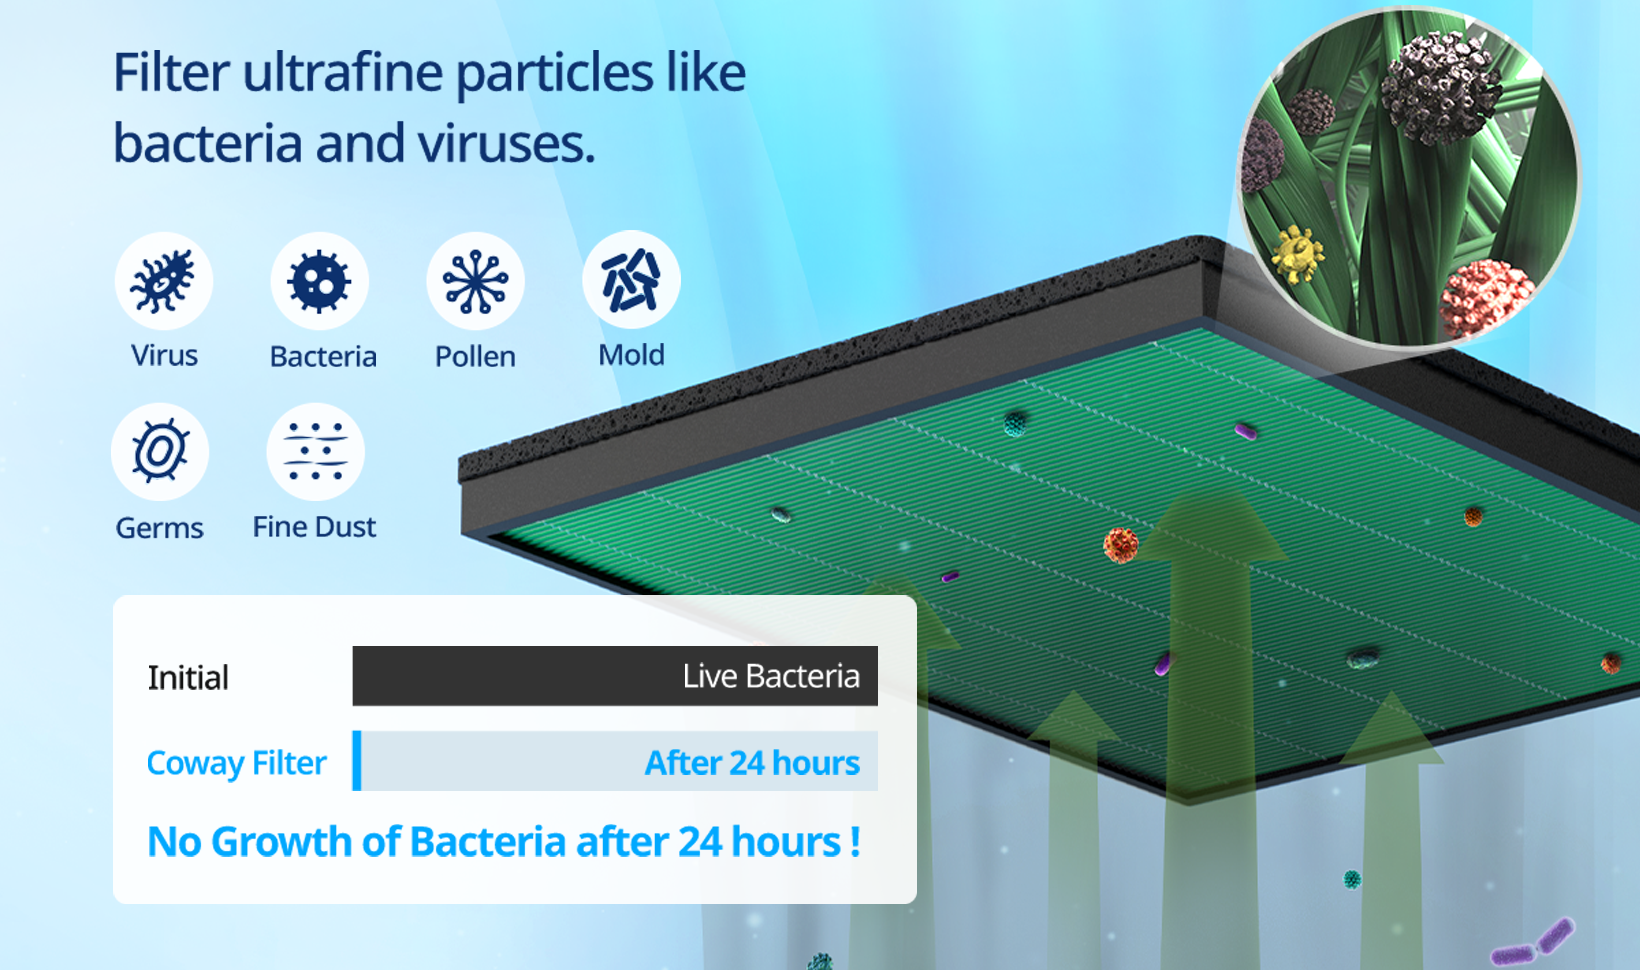 Filter ultrafine particles like bacteria and viruses: No Growth of Bacteria after 24 hours!